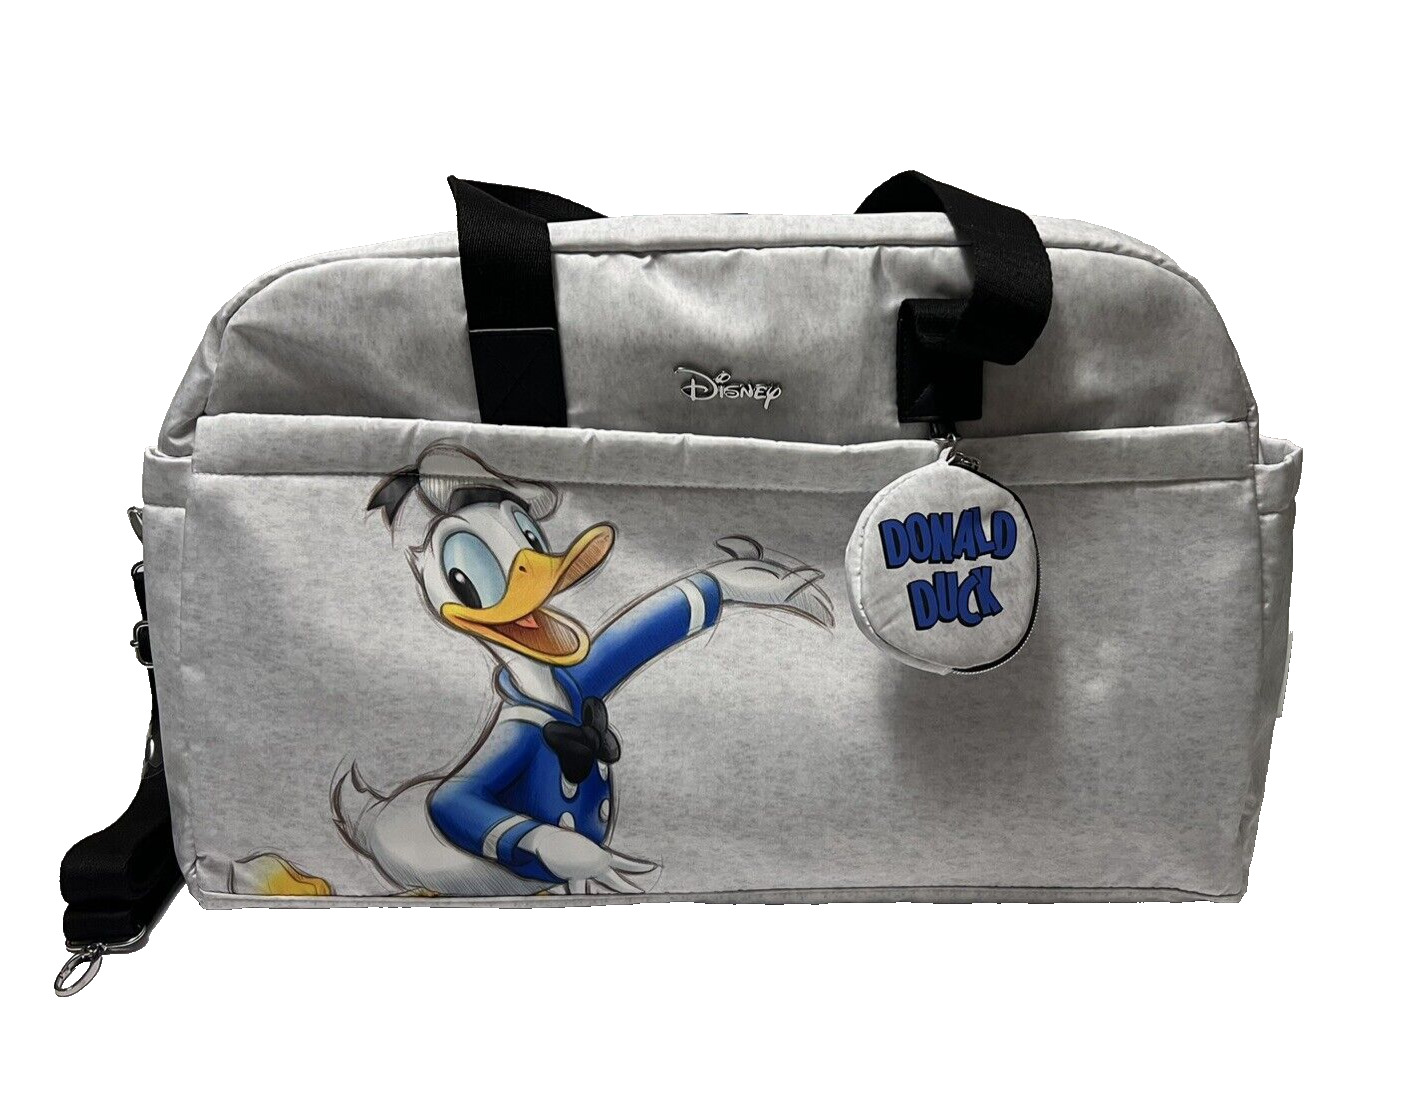 NEW Disney's 100th Anniversary Donald Duck Weekender Gym Bag + Coin Purse